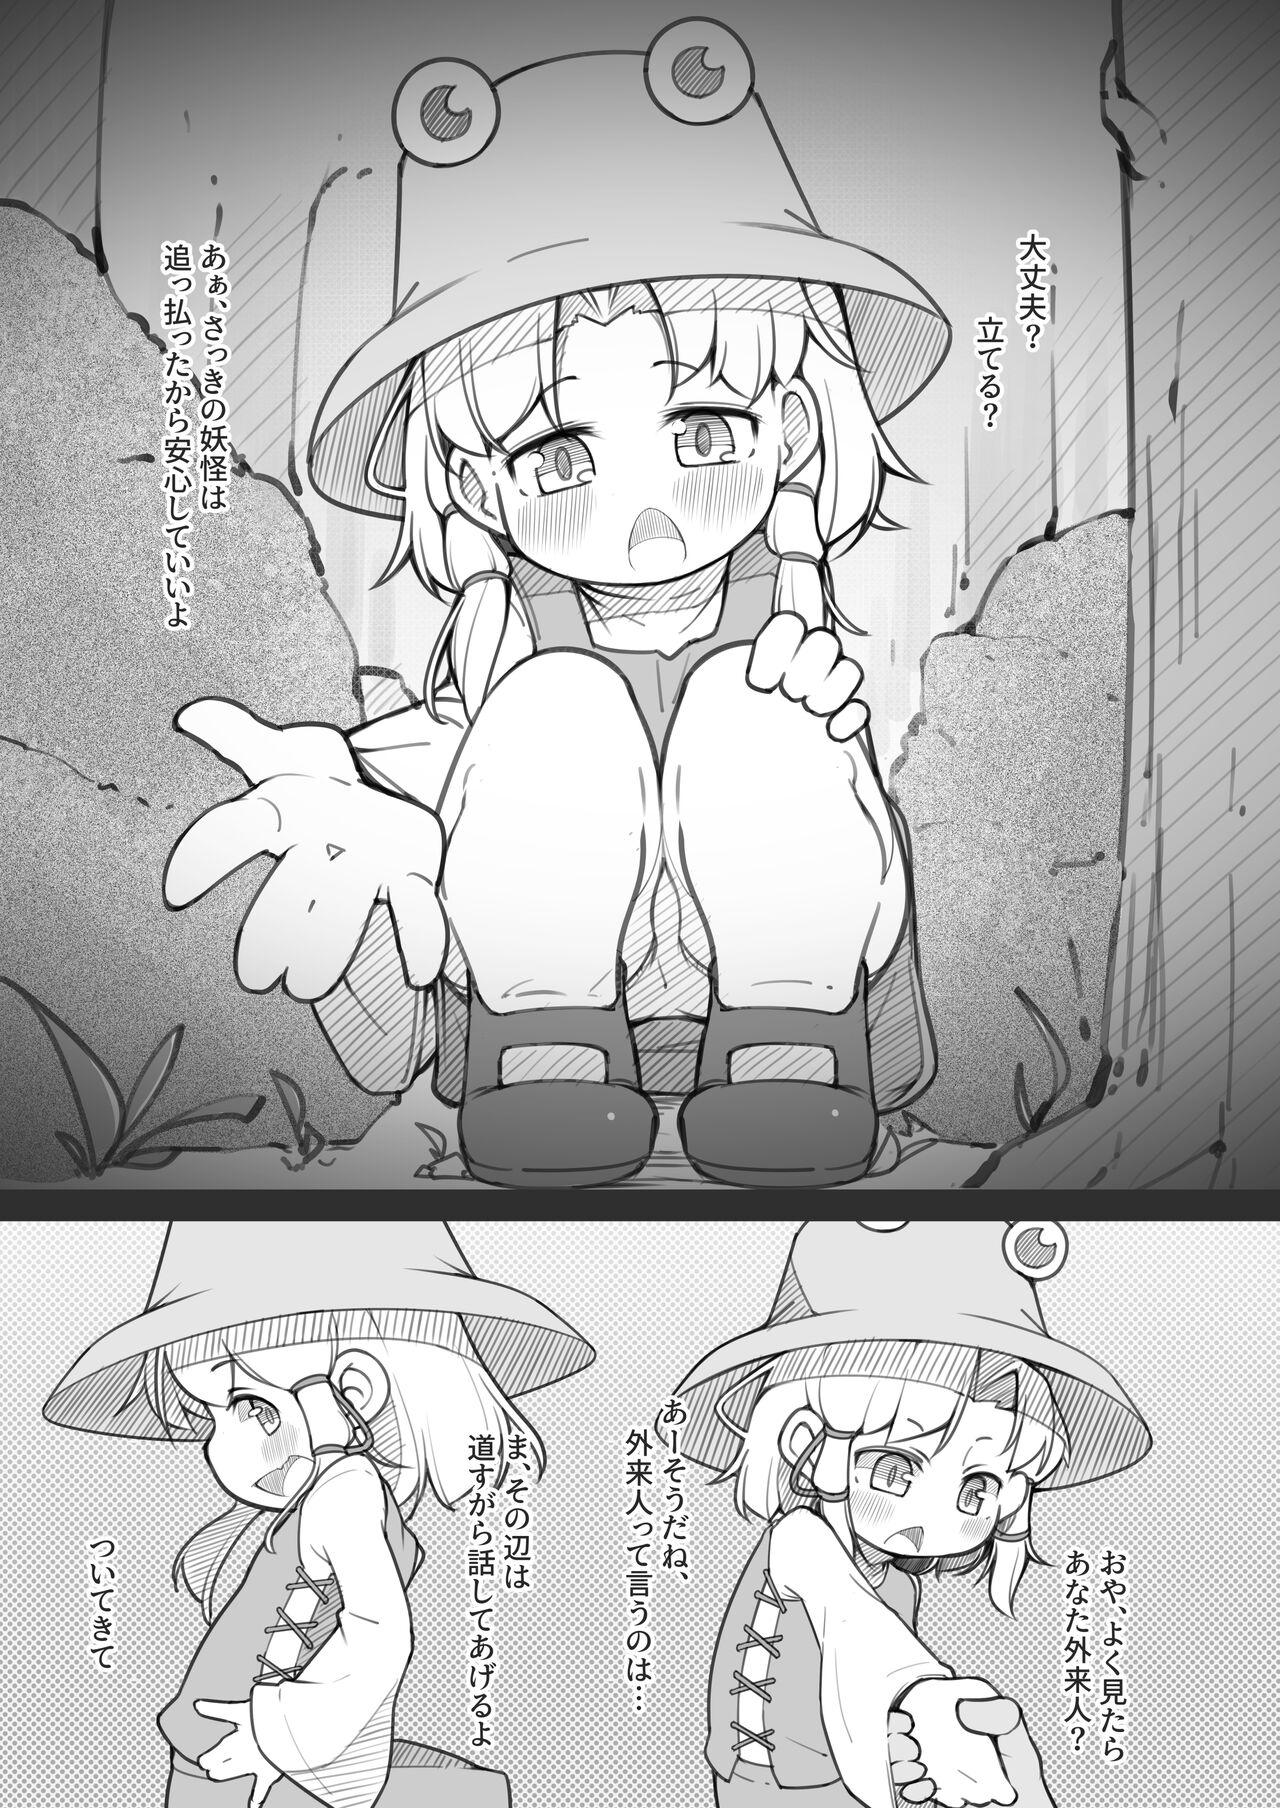 Sloppy Blowjob 幻想入りしたカリスマ教祖に諏訪子さまが祀り上げられる話 - Touhou project Off - Page 2